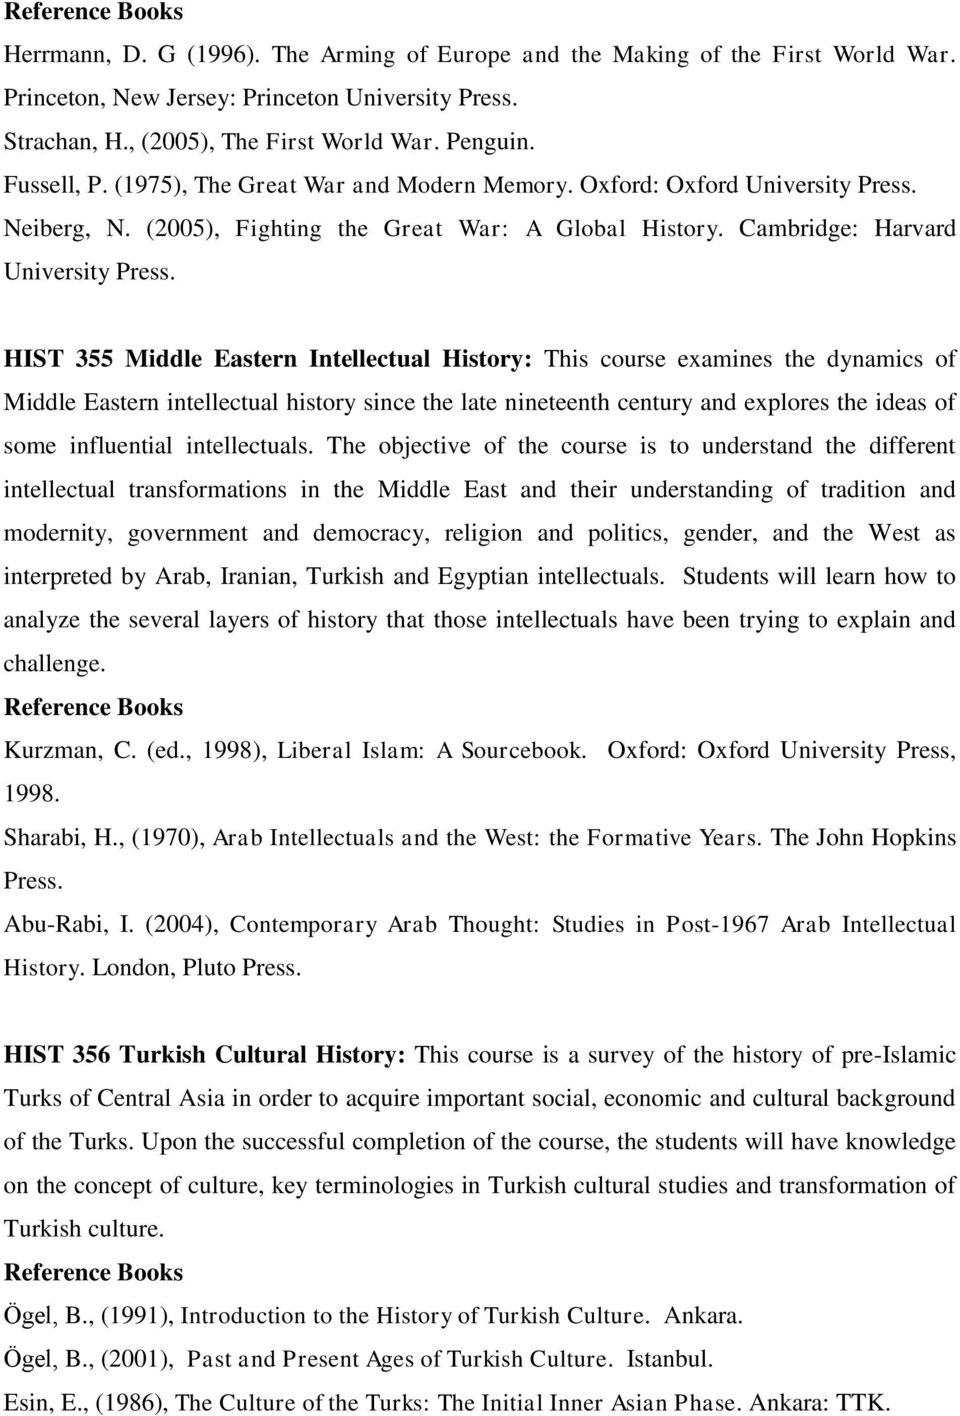 HIST 355 Middle Eastern Intellectual History: This course examines the dynamics of Middle Eastern intellectual history since the late nineteenth century and explores the ideas of some influential